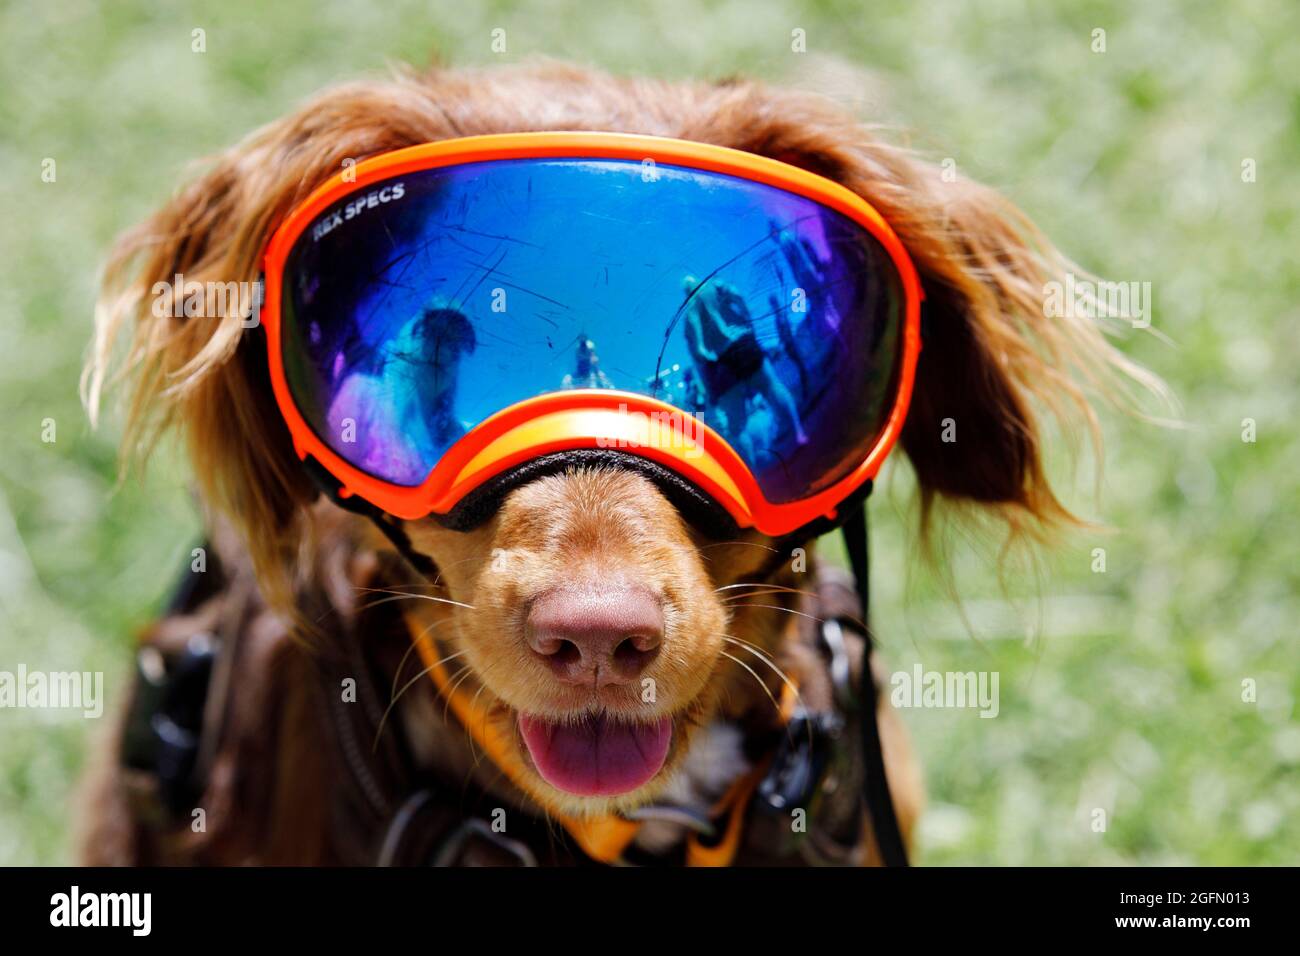 Floki a cocker spaniel x collie wears a sun visor to protect his eyes from premature blindness due to an eye condition, at Dogstival, Burley in the Ne Stock Photo